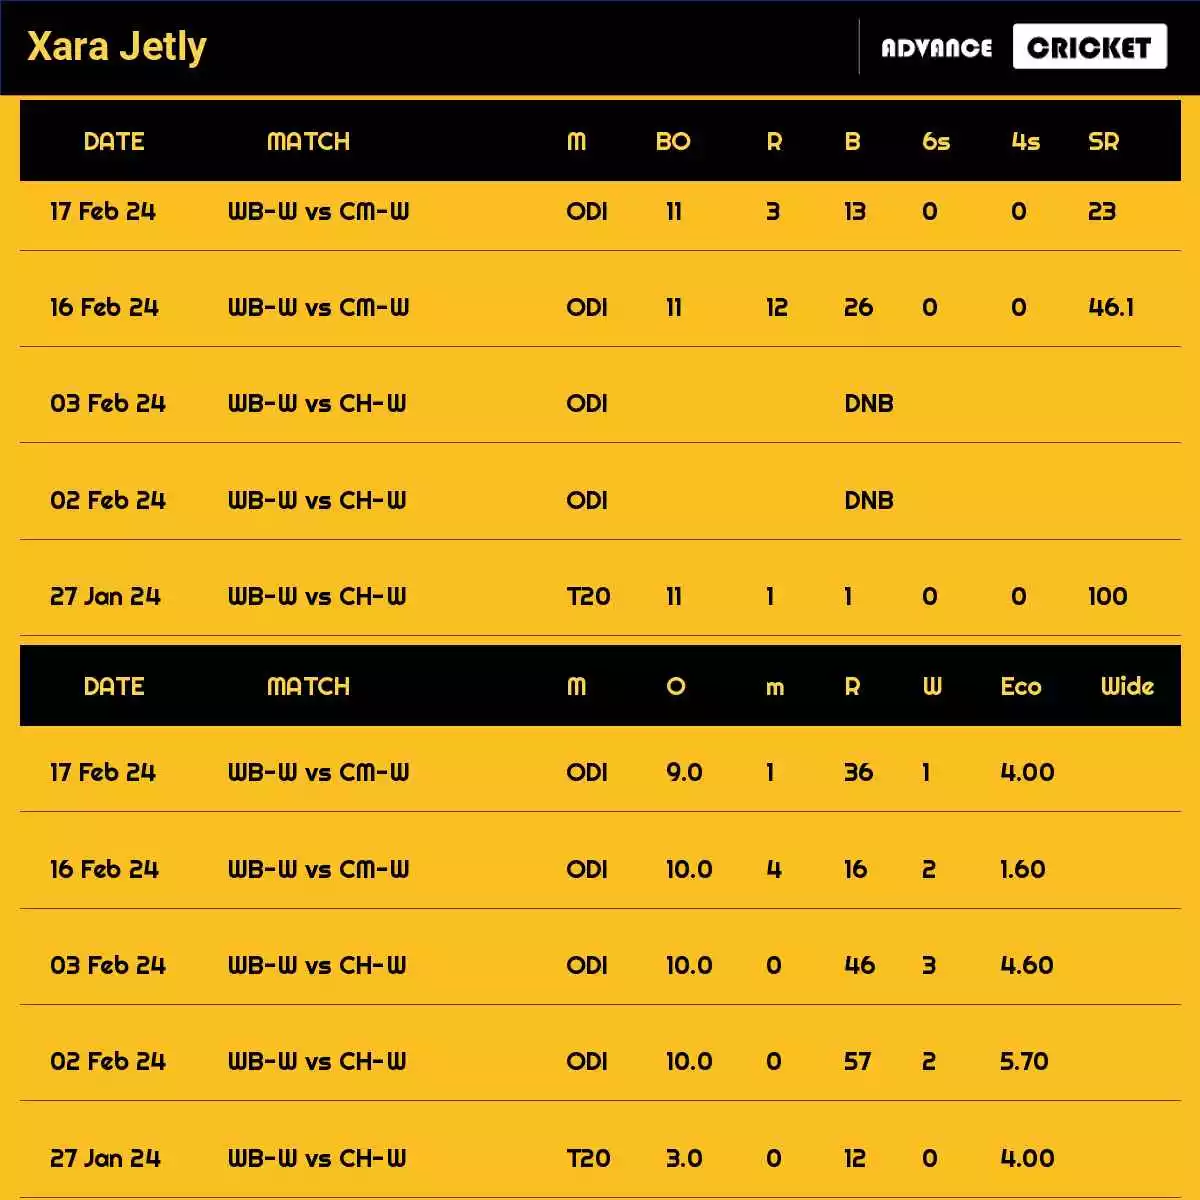 Xara Jetly Recent Matches Details Date Wise